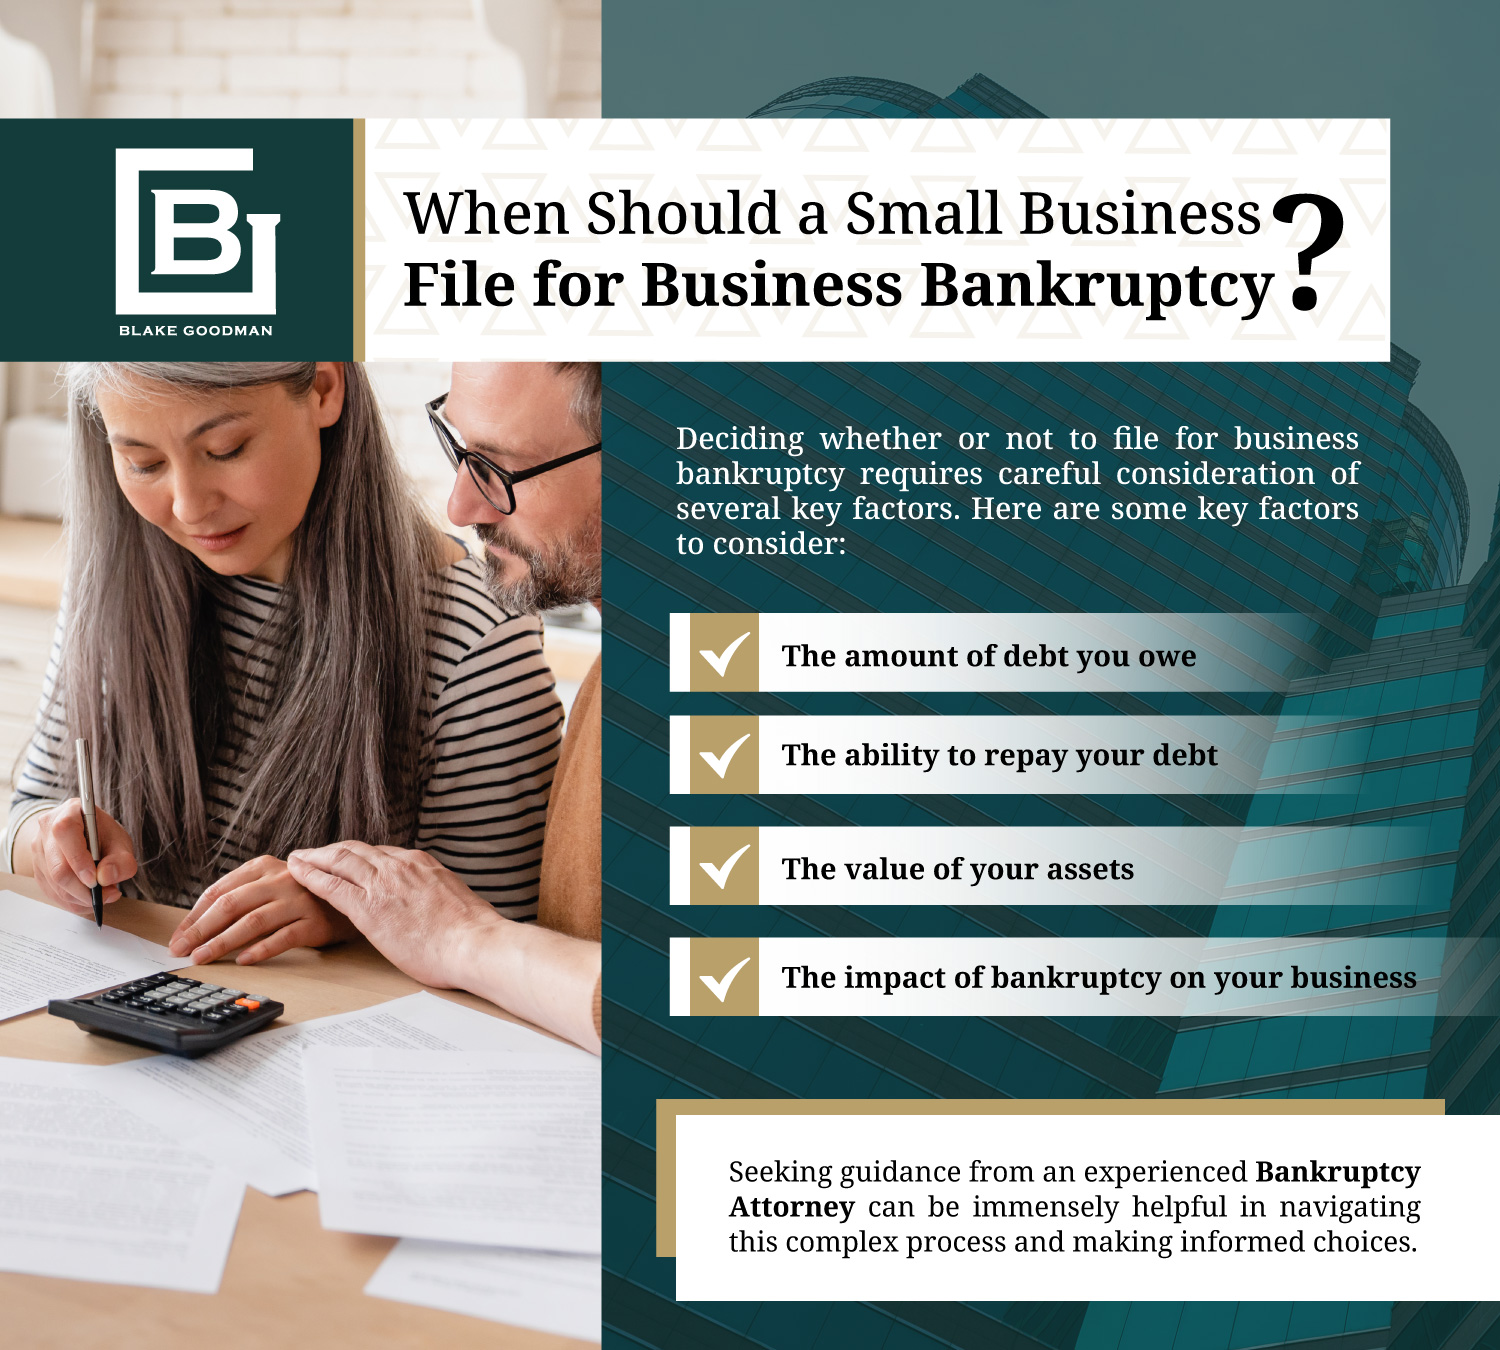 Infographic that shows when a small business should file for business bankruptcy